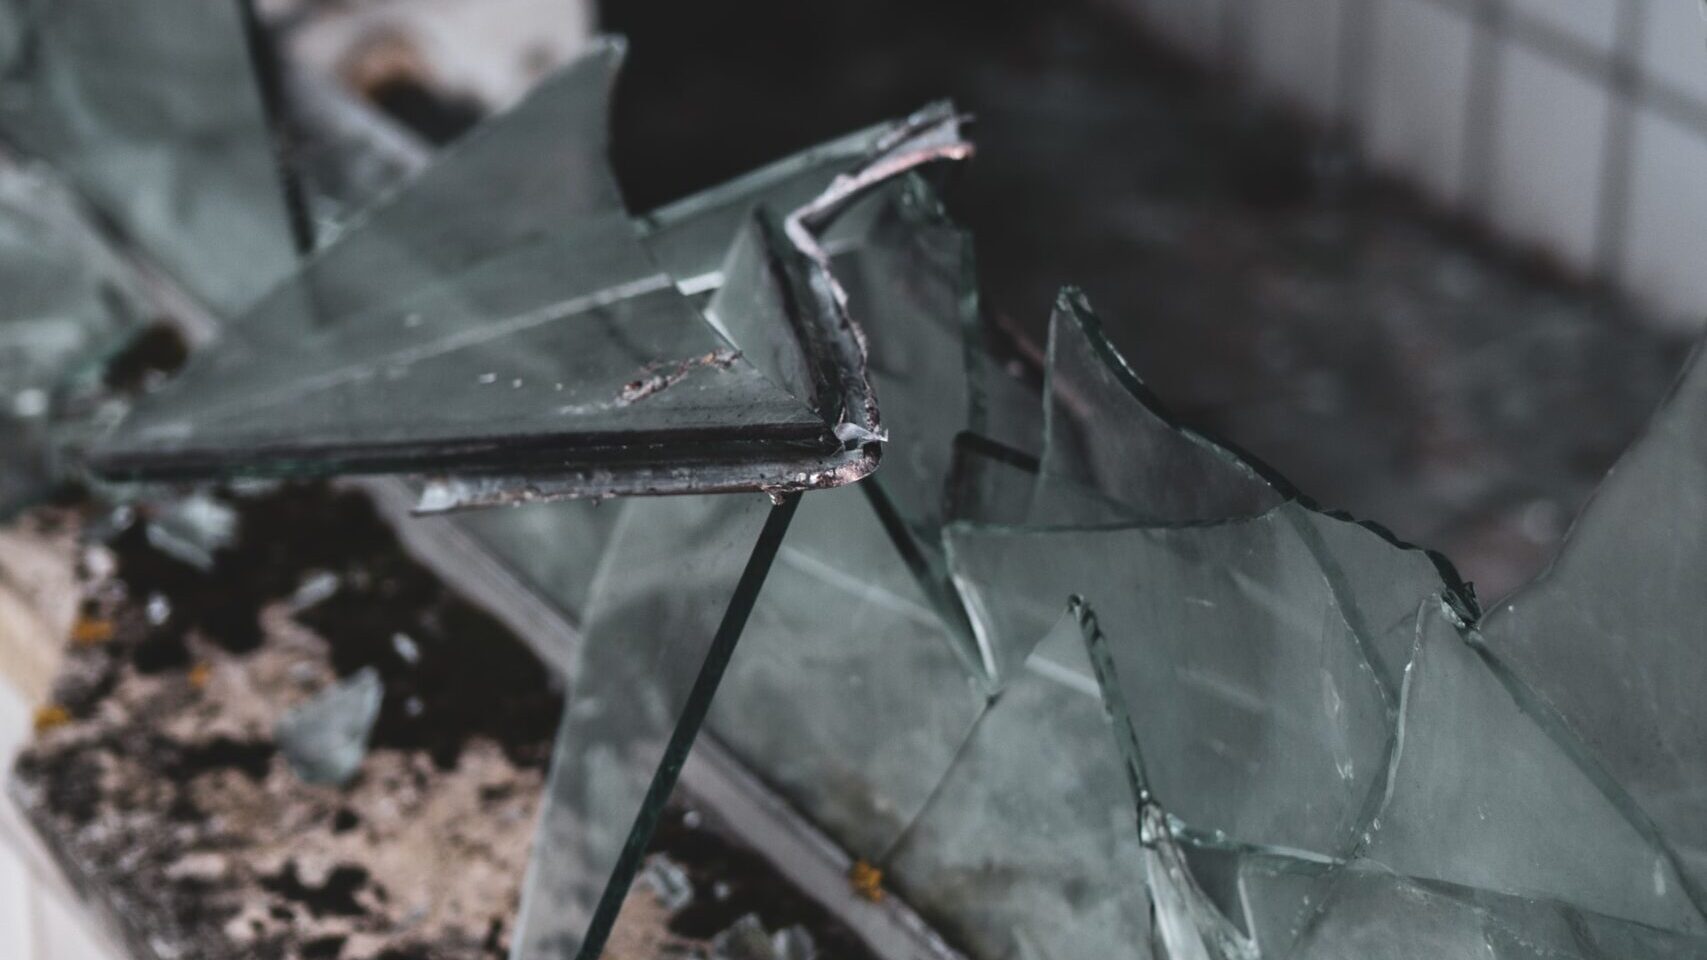 A smashed window with dangerous looking glass shards.